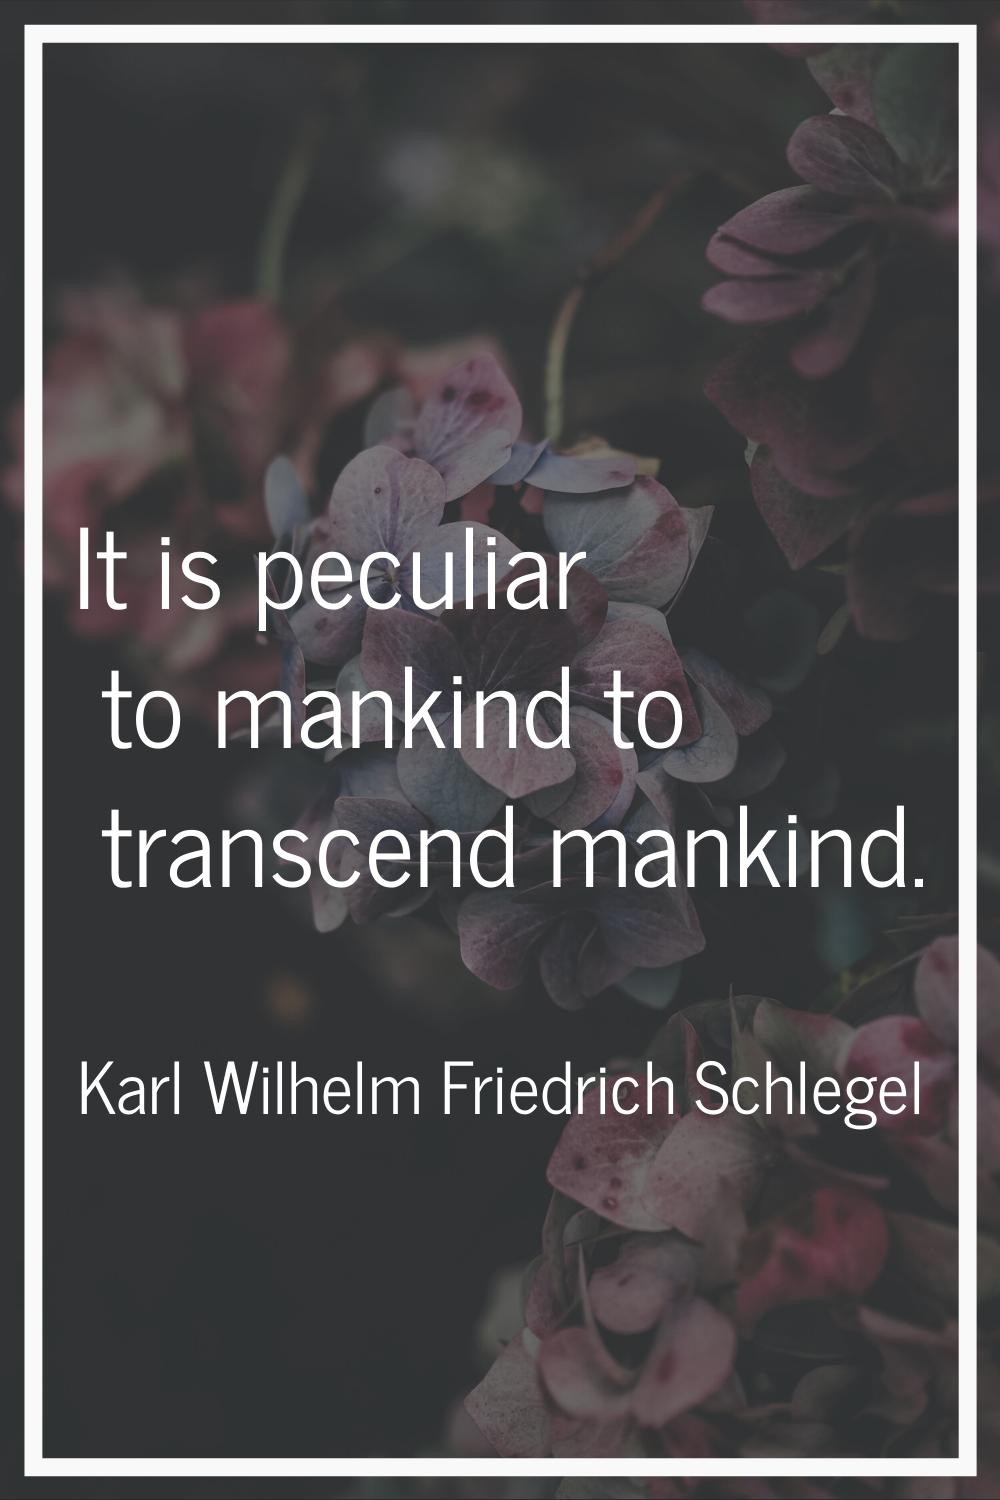 It is peculiar to mankind to transcend mankind.